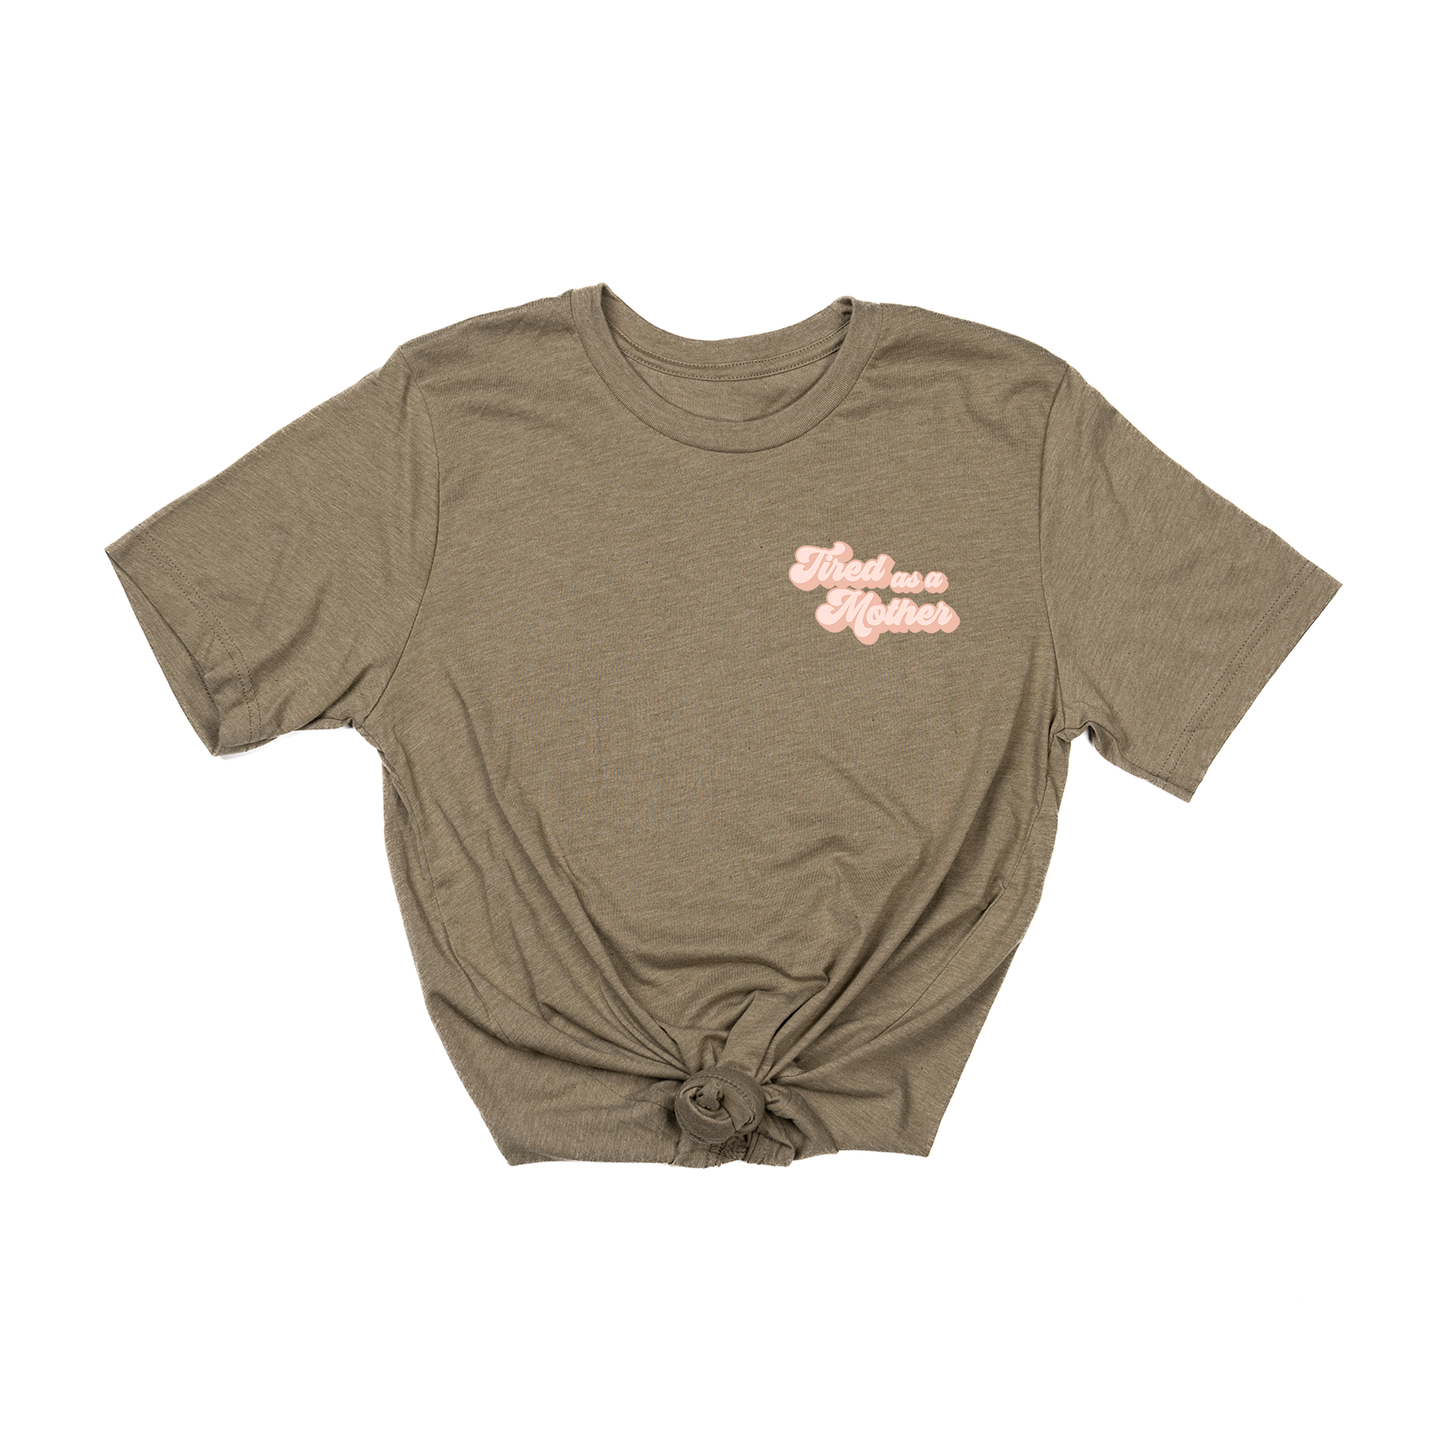 Tired as a Mother (Pocket) - Tee (Olive)